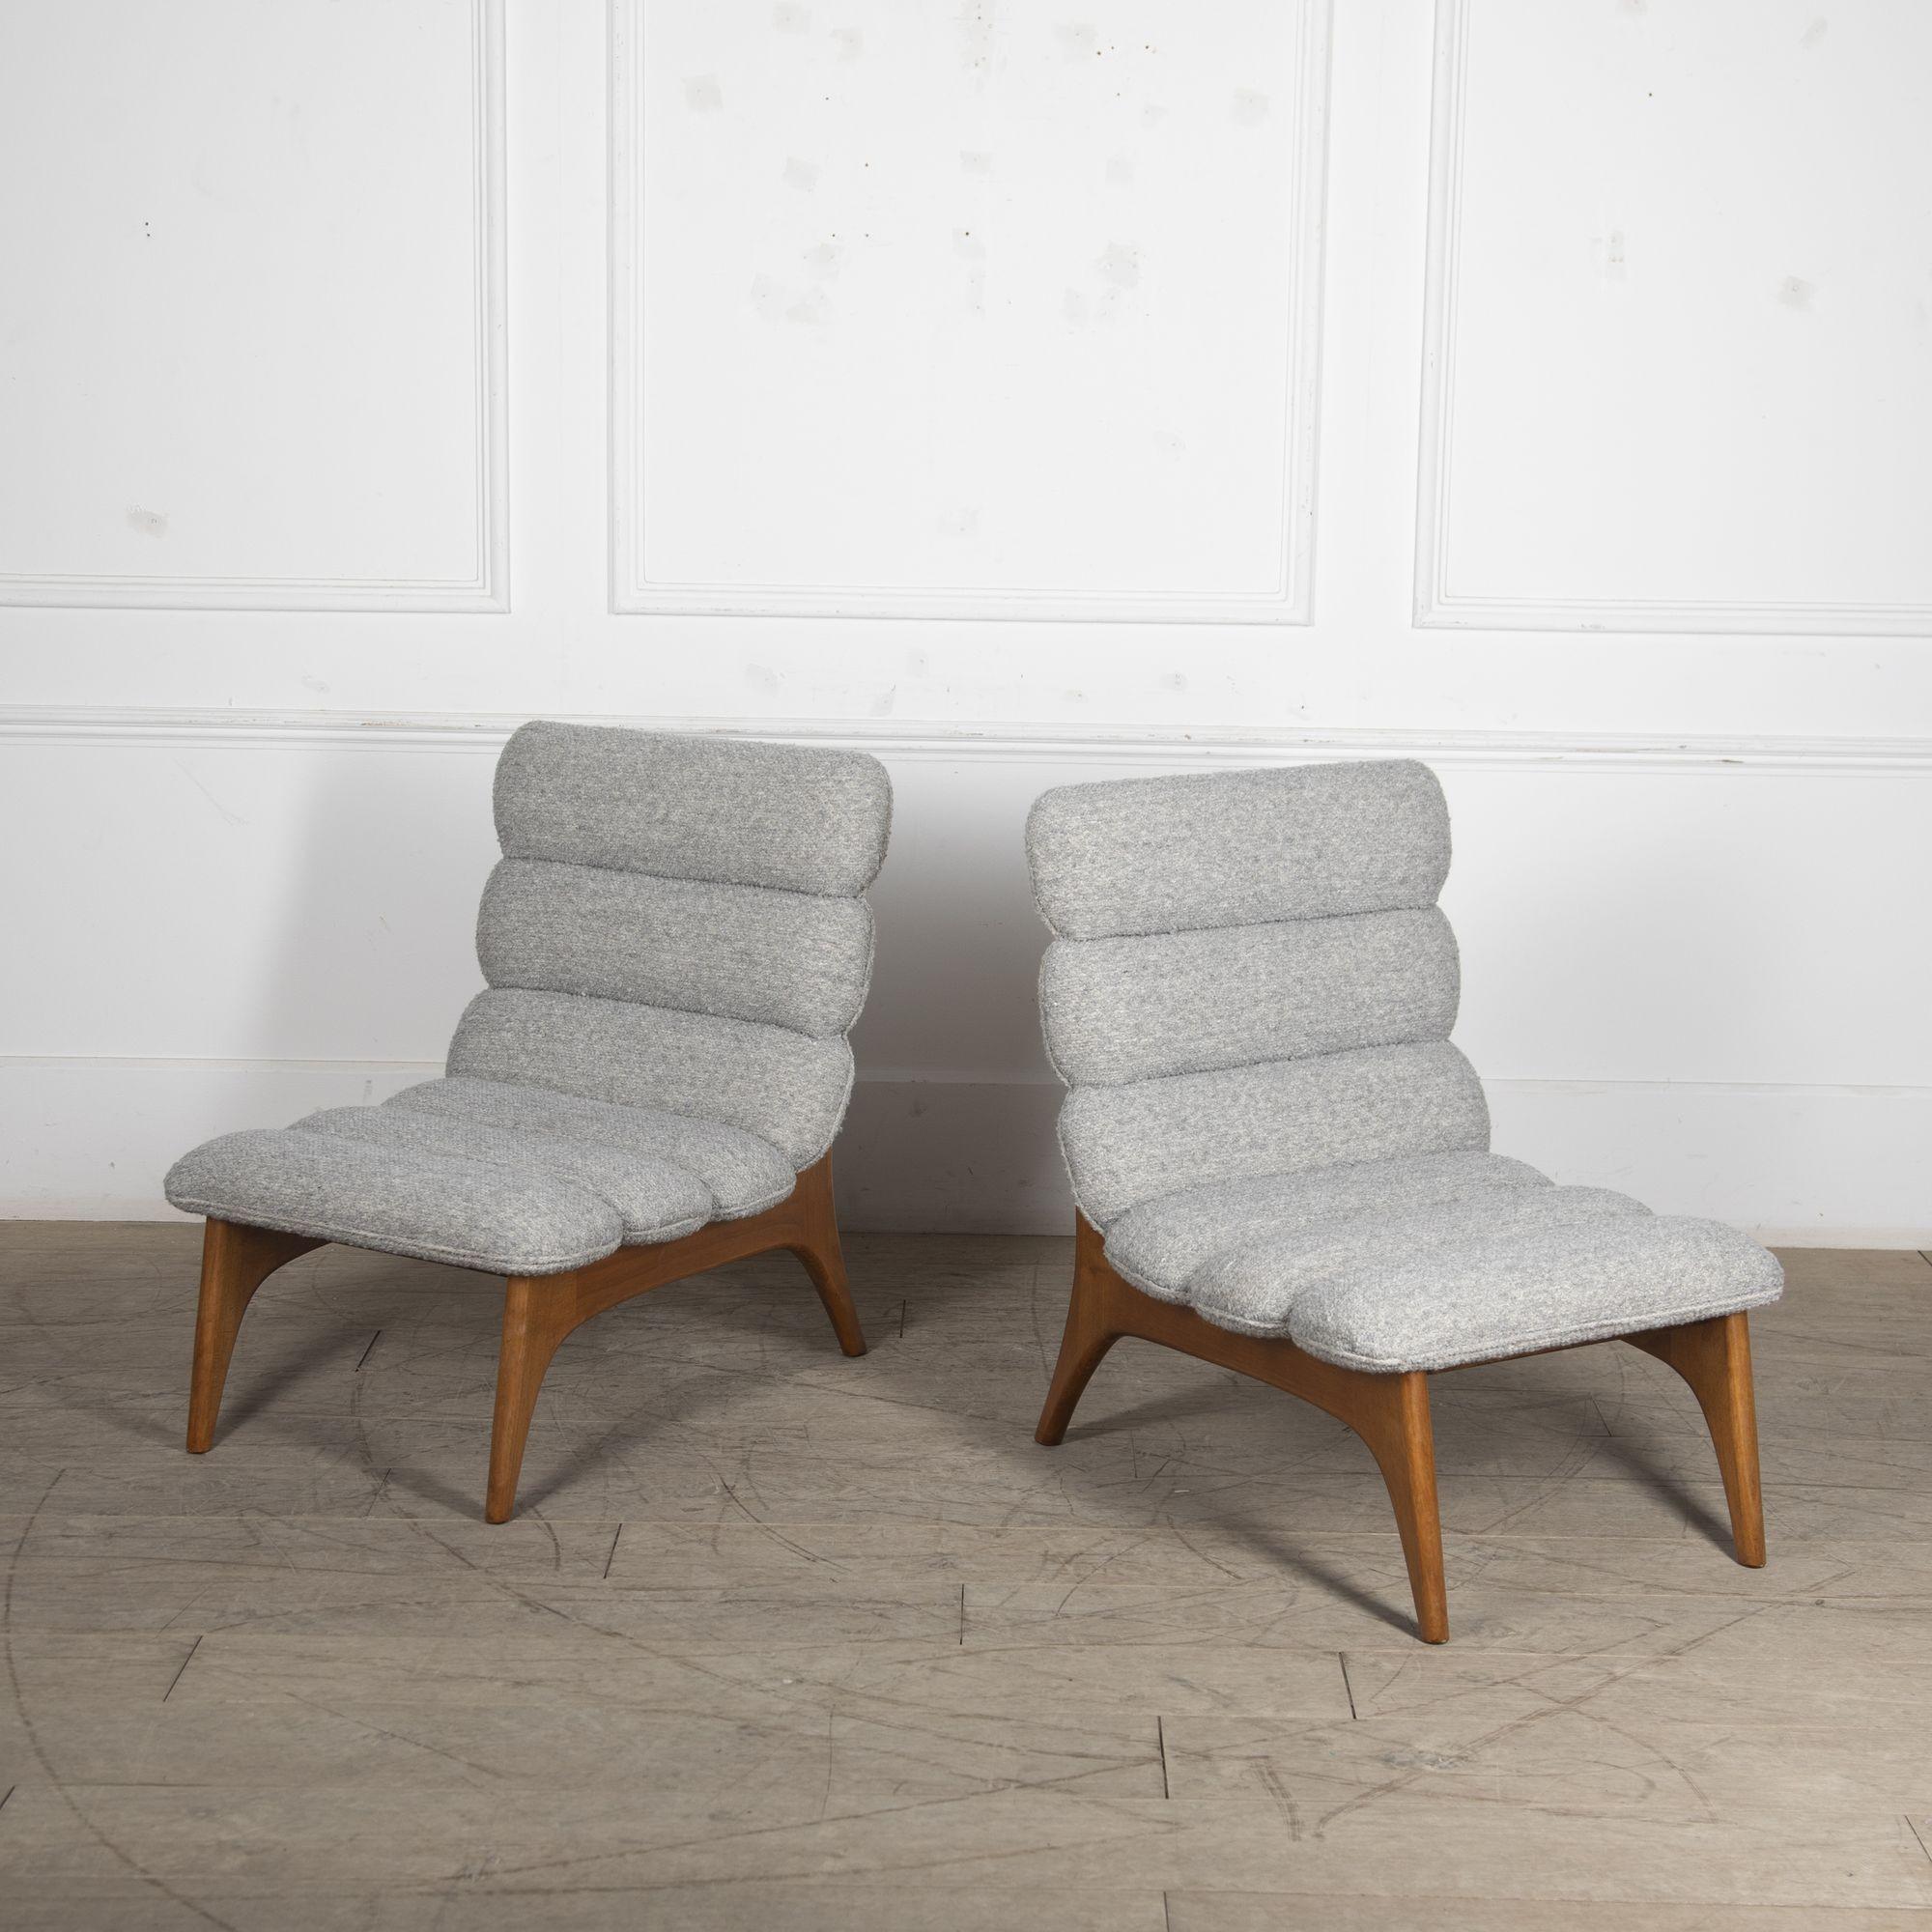 Italian mid-century style contemporary armchairs.
With a gorgeous beech frame and light grey boucle upholstery.
This gorgeous pair of modern armchairs would look fabulous in any living space.